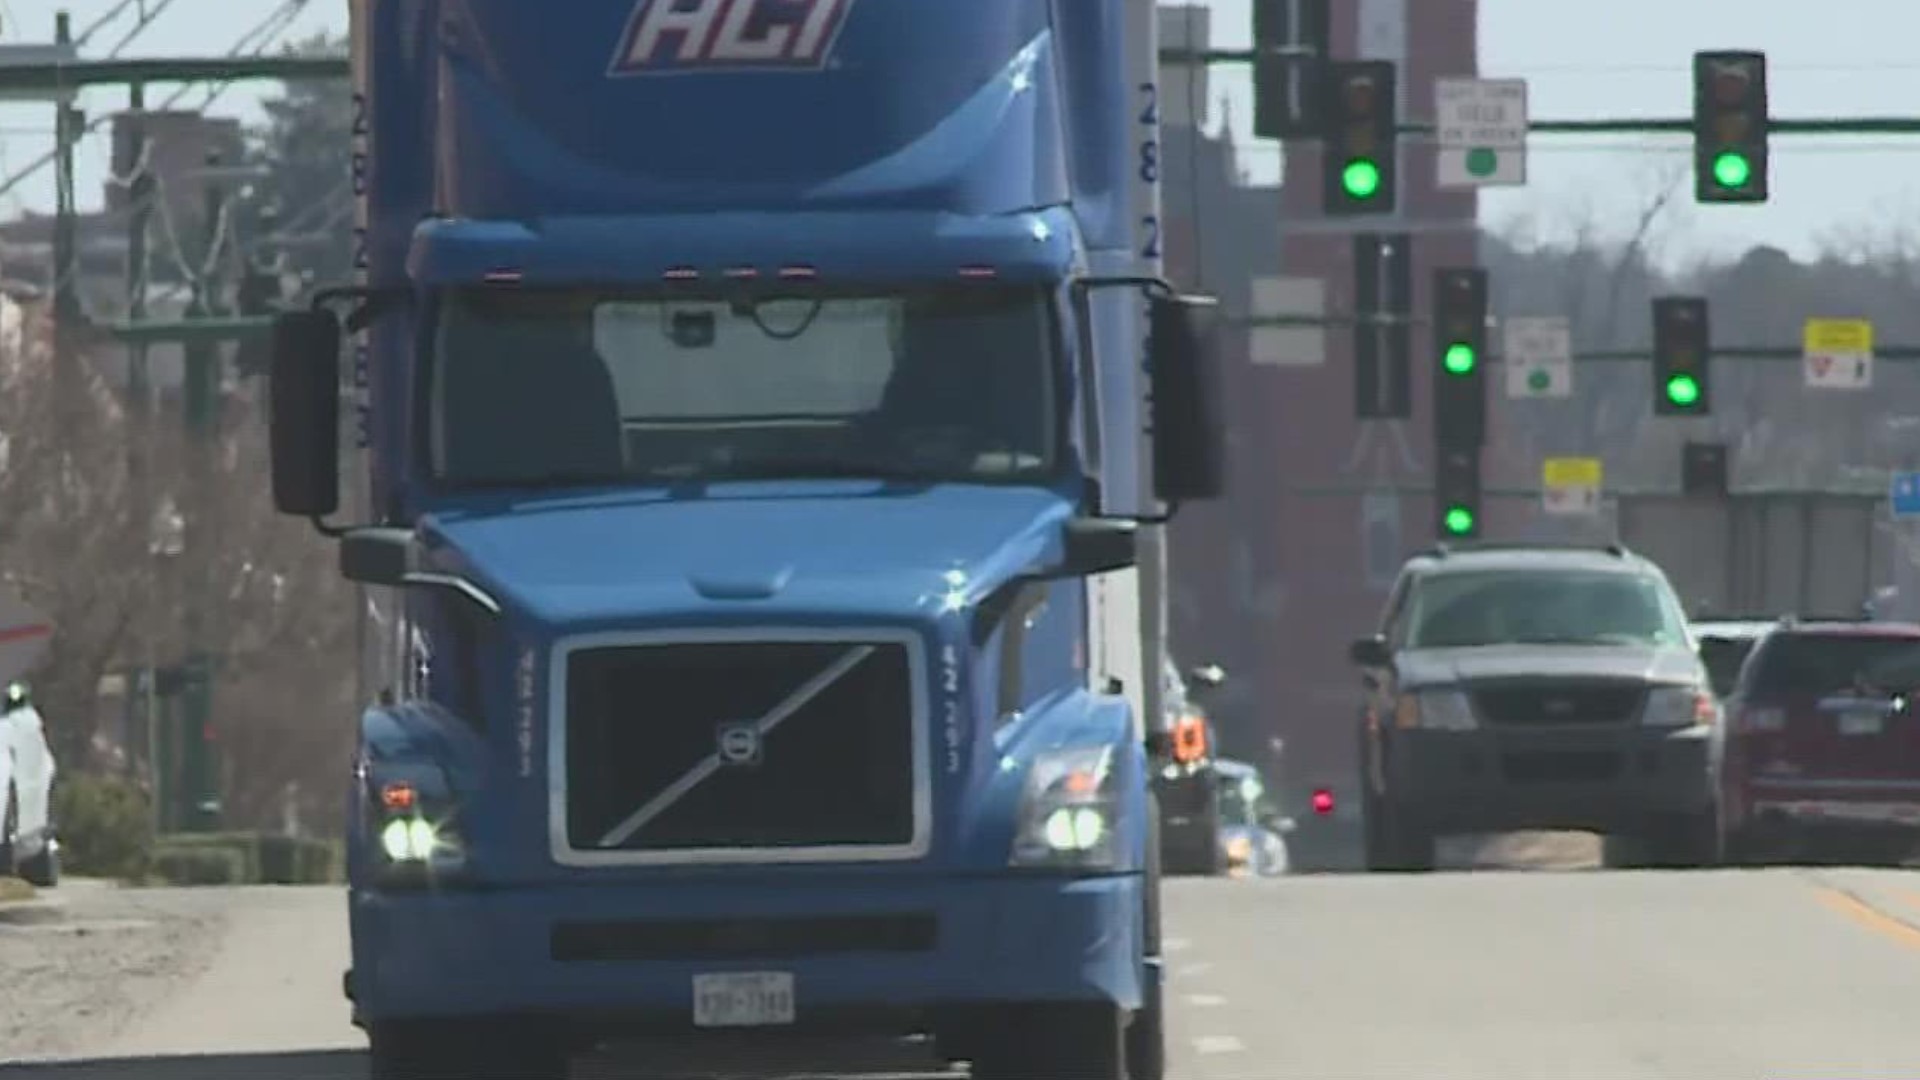 Fort Smith is trying to figure out a way to modify Highway 64 to where semi-trucks no longer cause traffic in the downtown area.